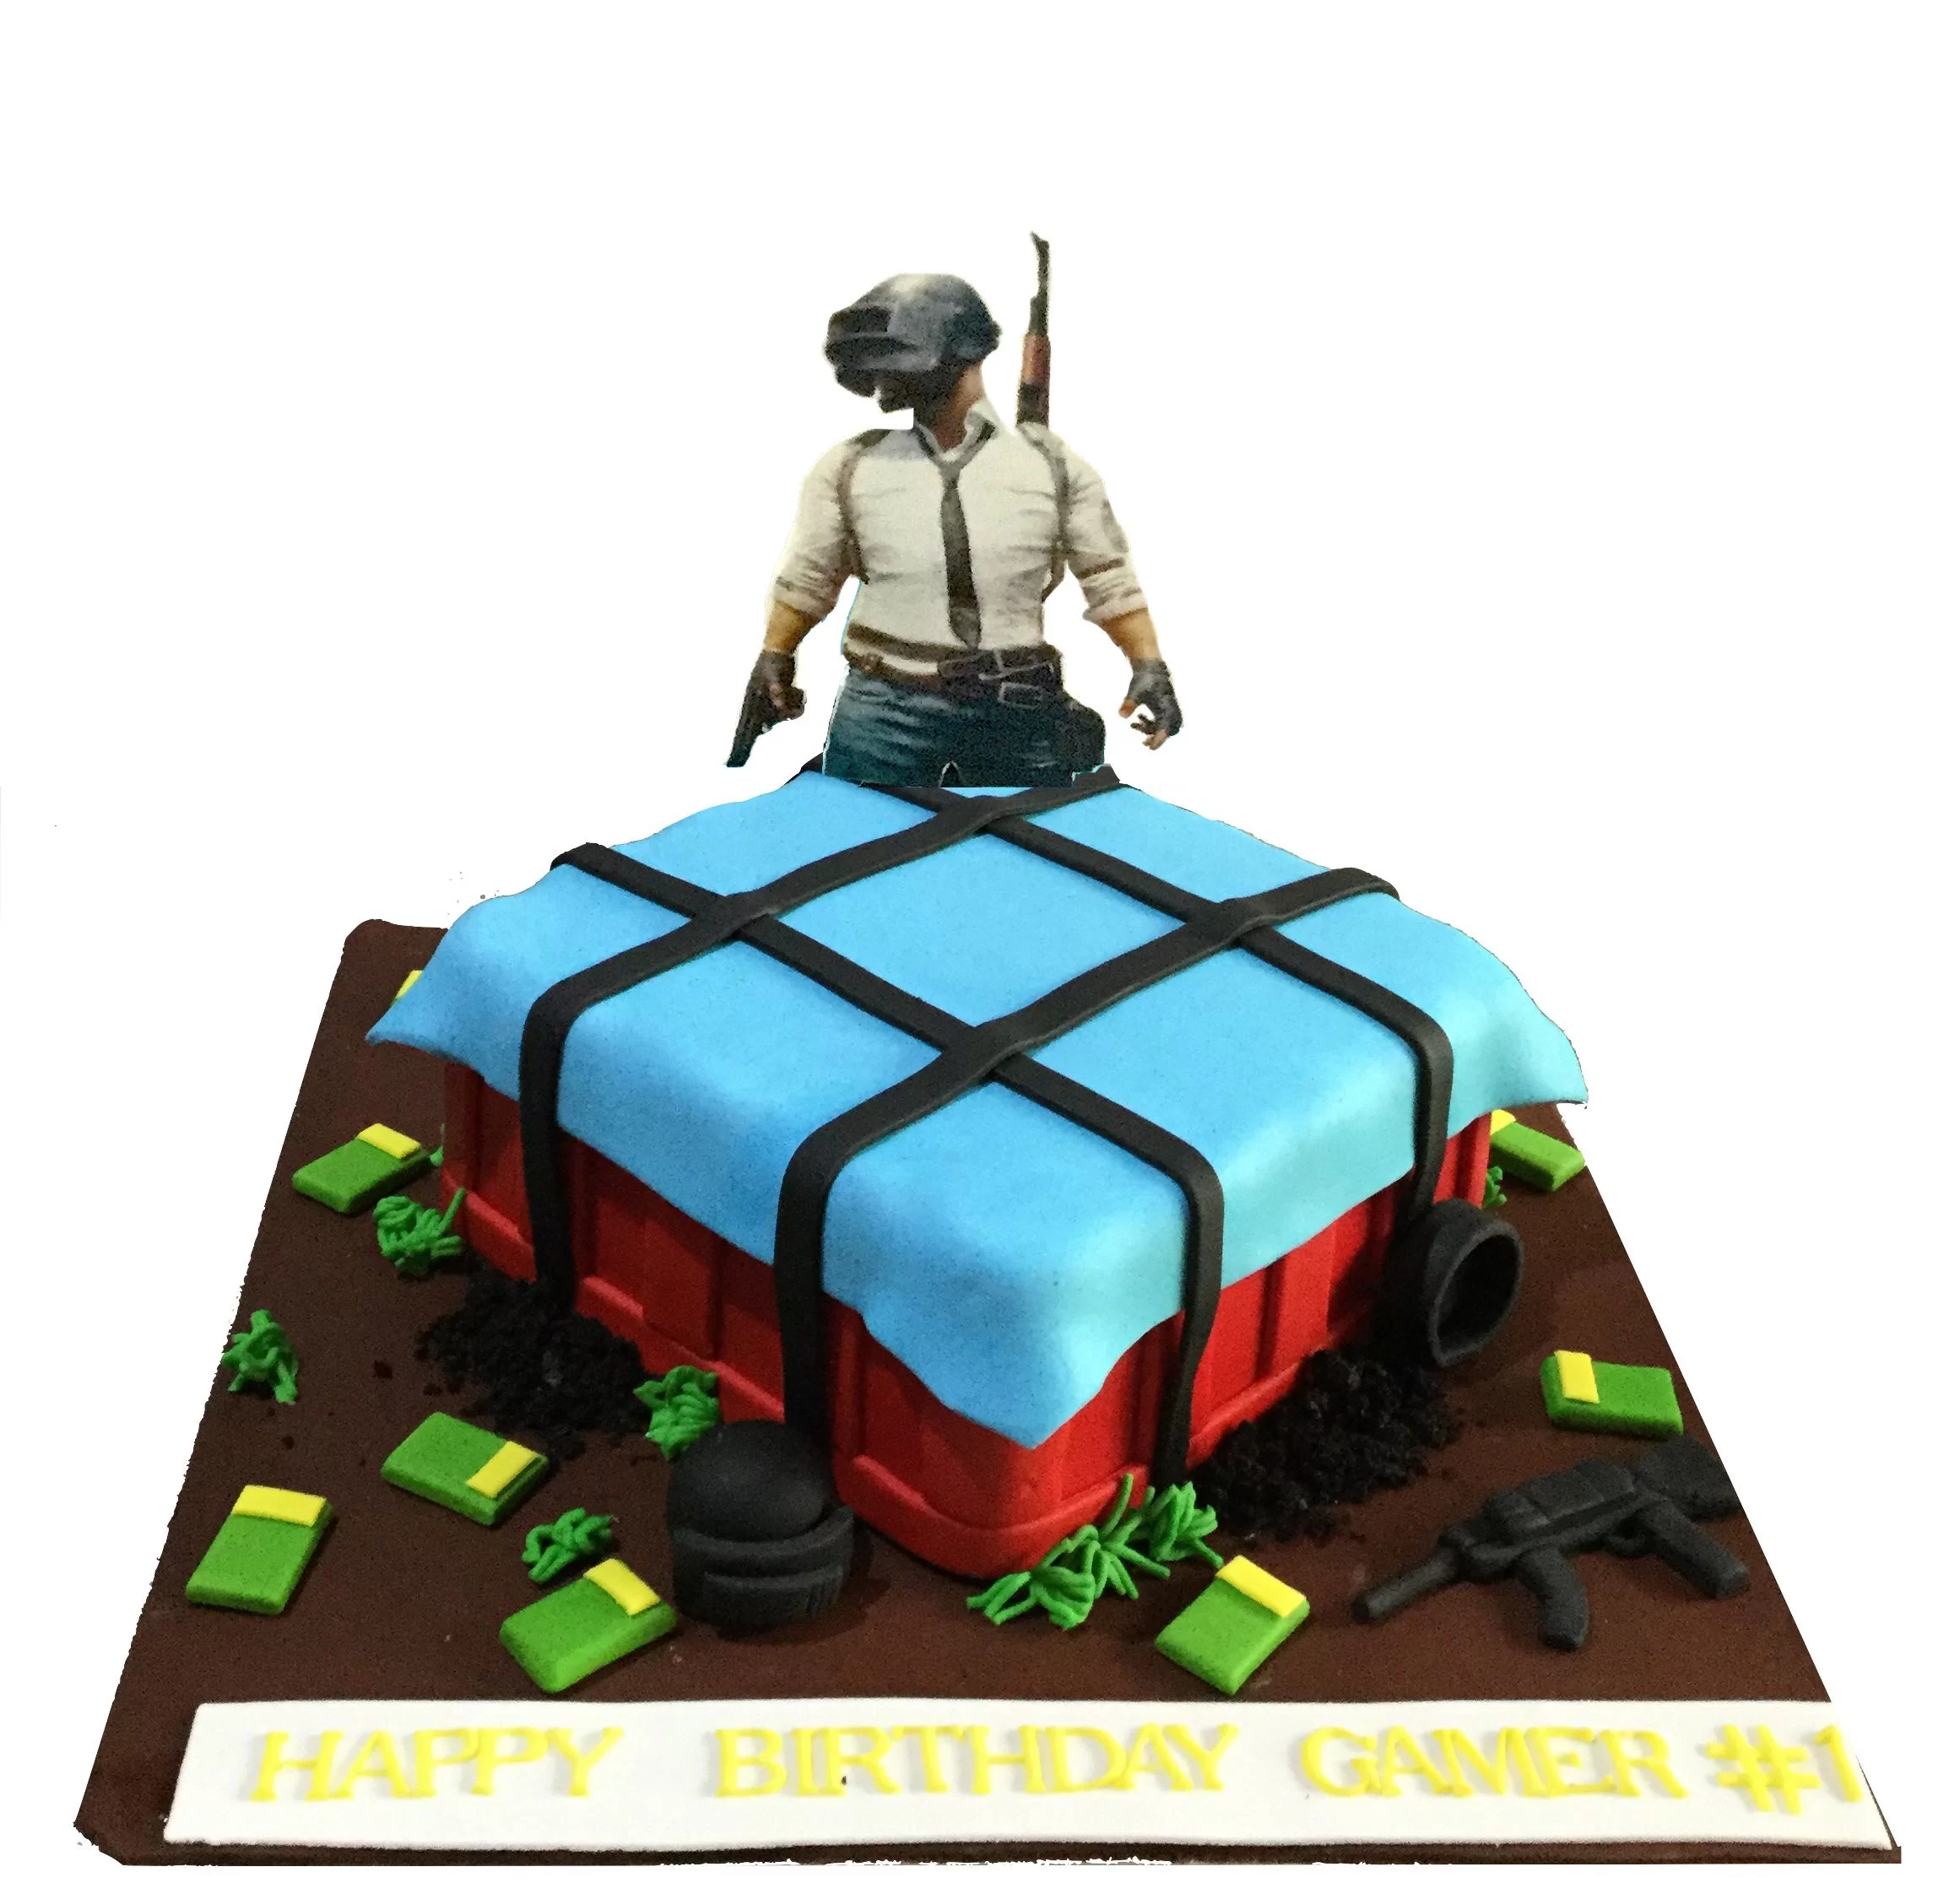 Ponni'shobbybaker - A custom made PUBG Theme cake with an airdrop box  ,which is going to be a secret treasure for a surprise gift. Inside flavour  was chocolate and edible fondant accents. |